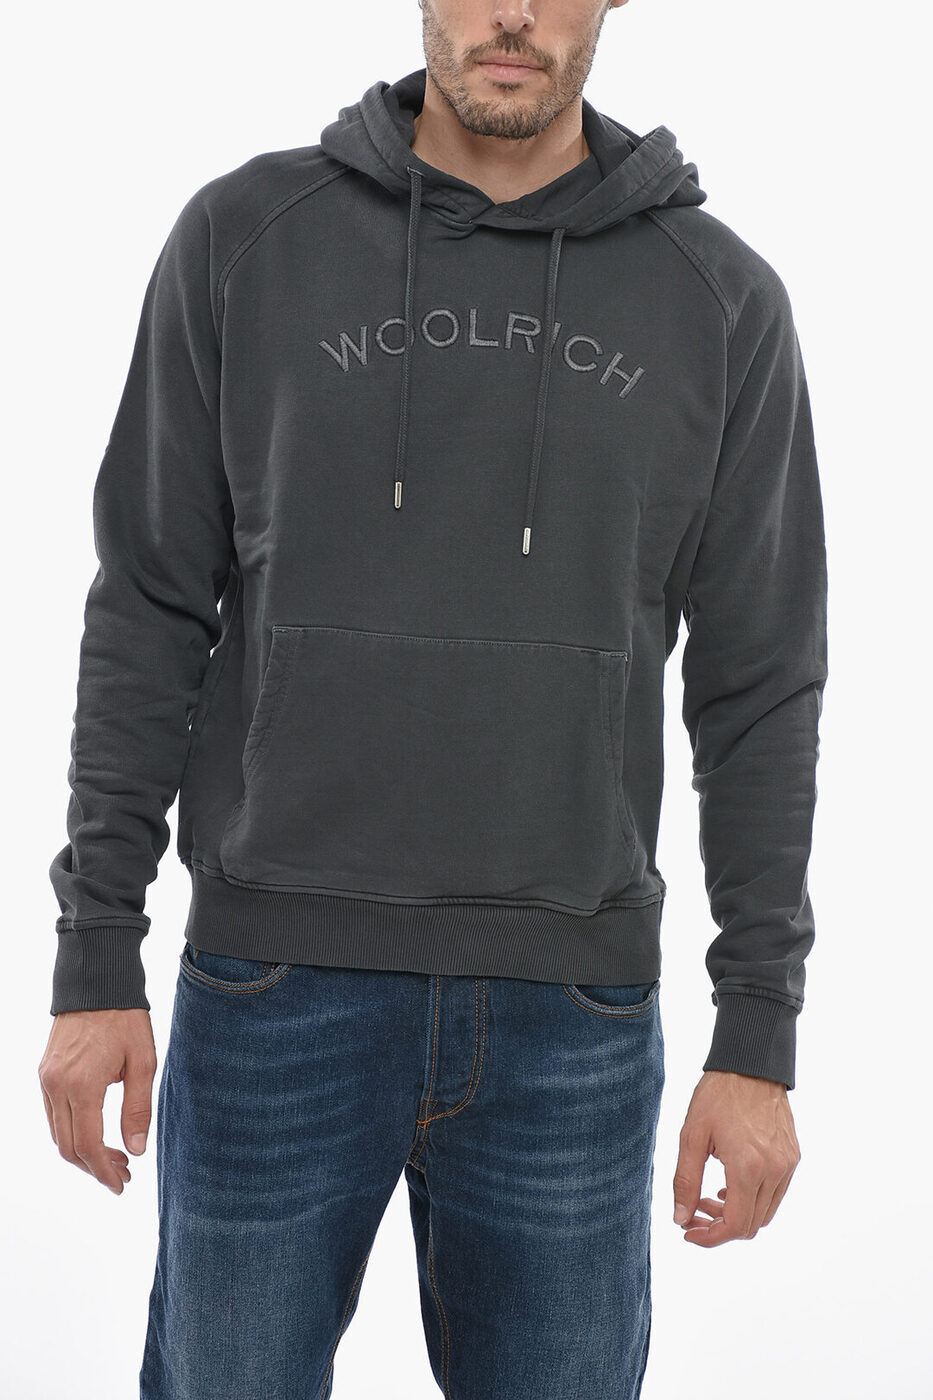 WOOLRICH ウールリッチ トレーナー CFWOSW0188MRUT3470100 メンズ PATCH POCKET SOLID COLOR HOODIE 【関税・送料無料】【ラッピング無料】 dk